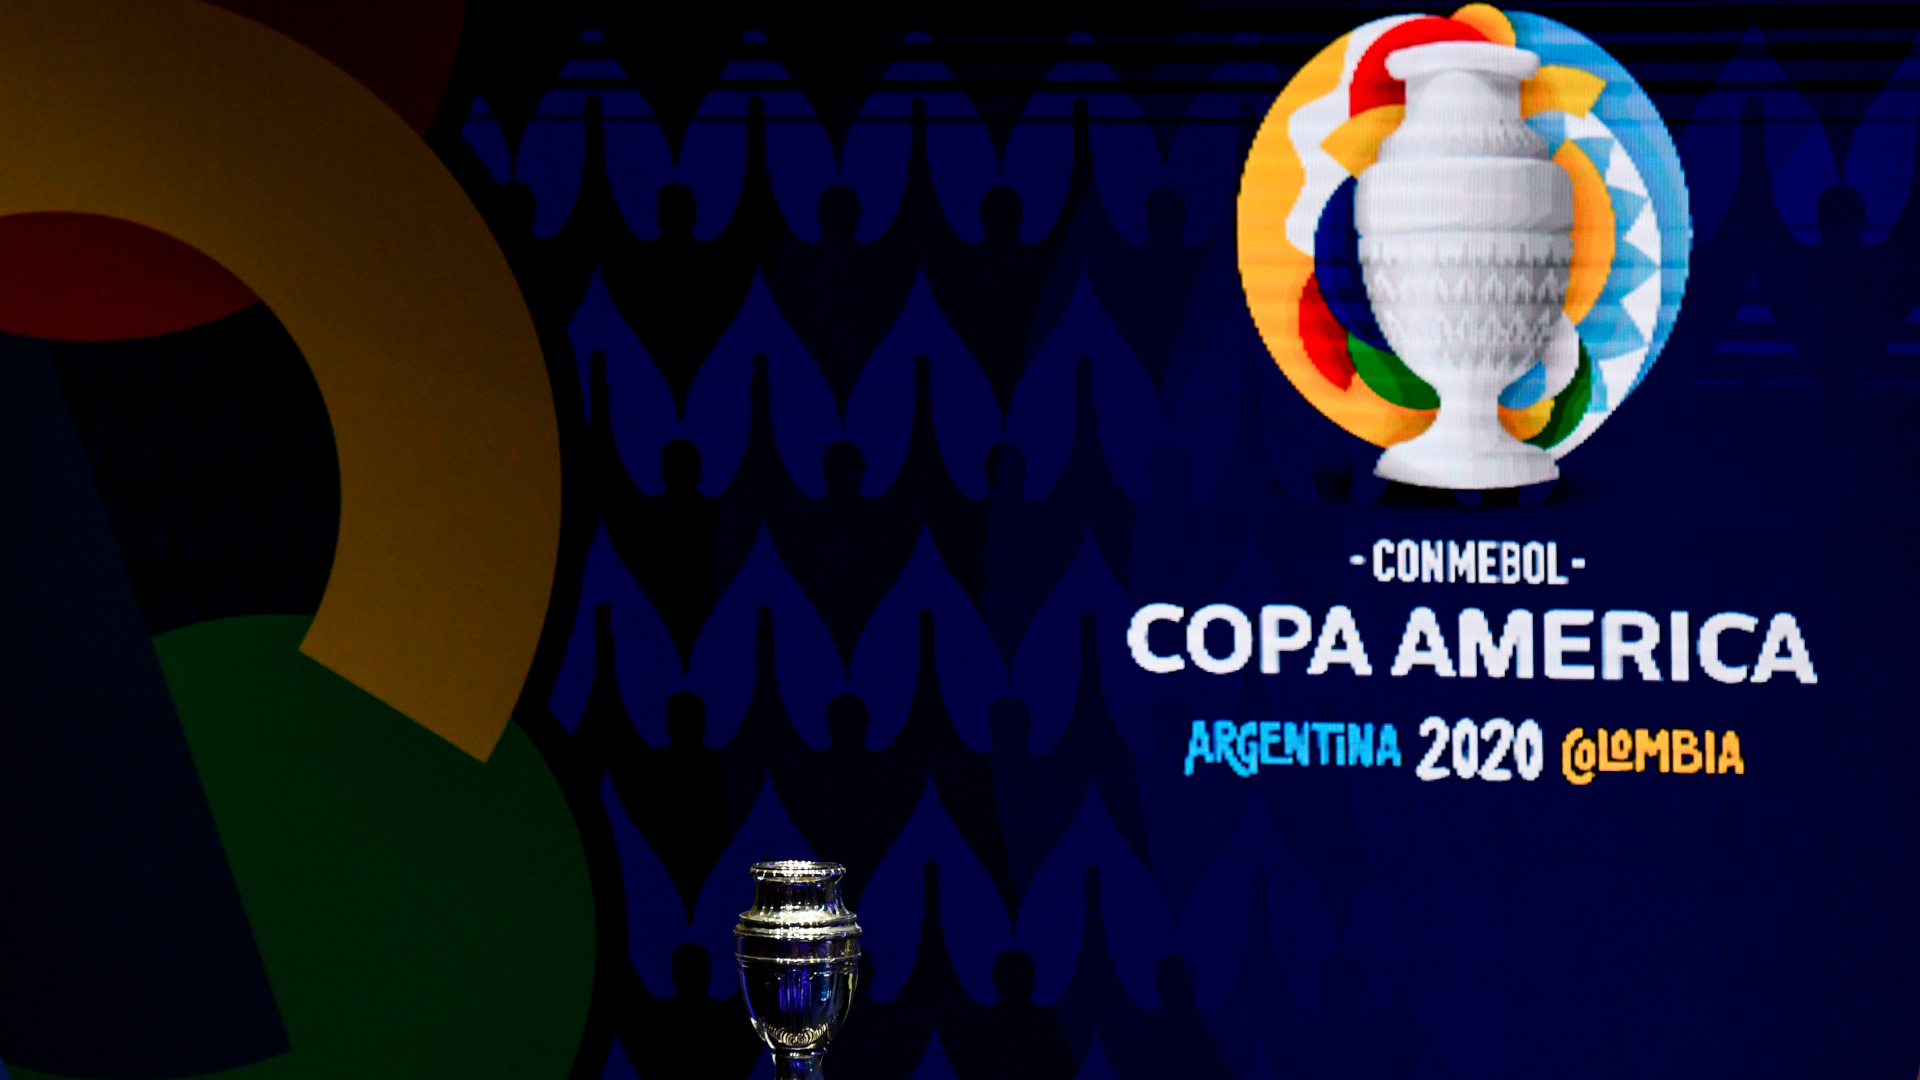 Copa America pulled from Argentina as Covid crisis puts tournament in jeopardy